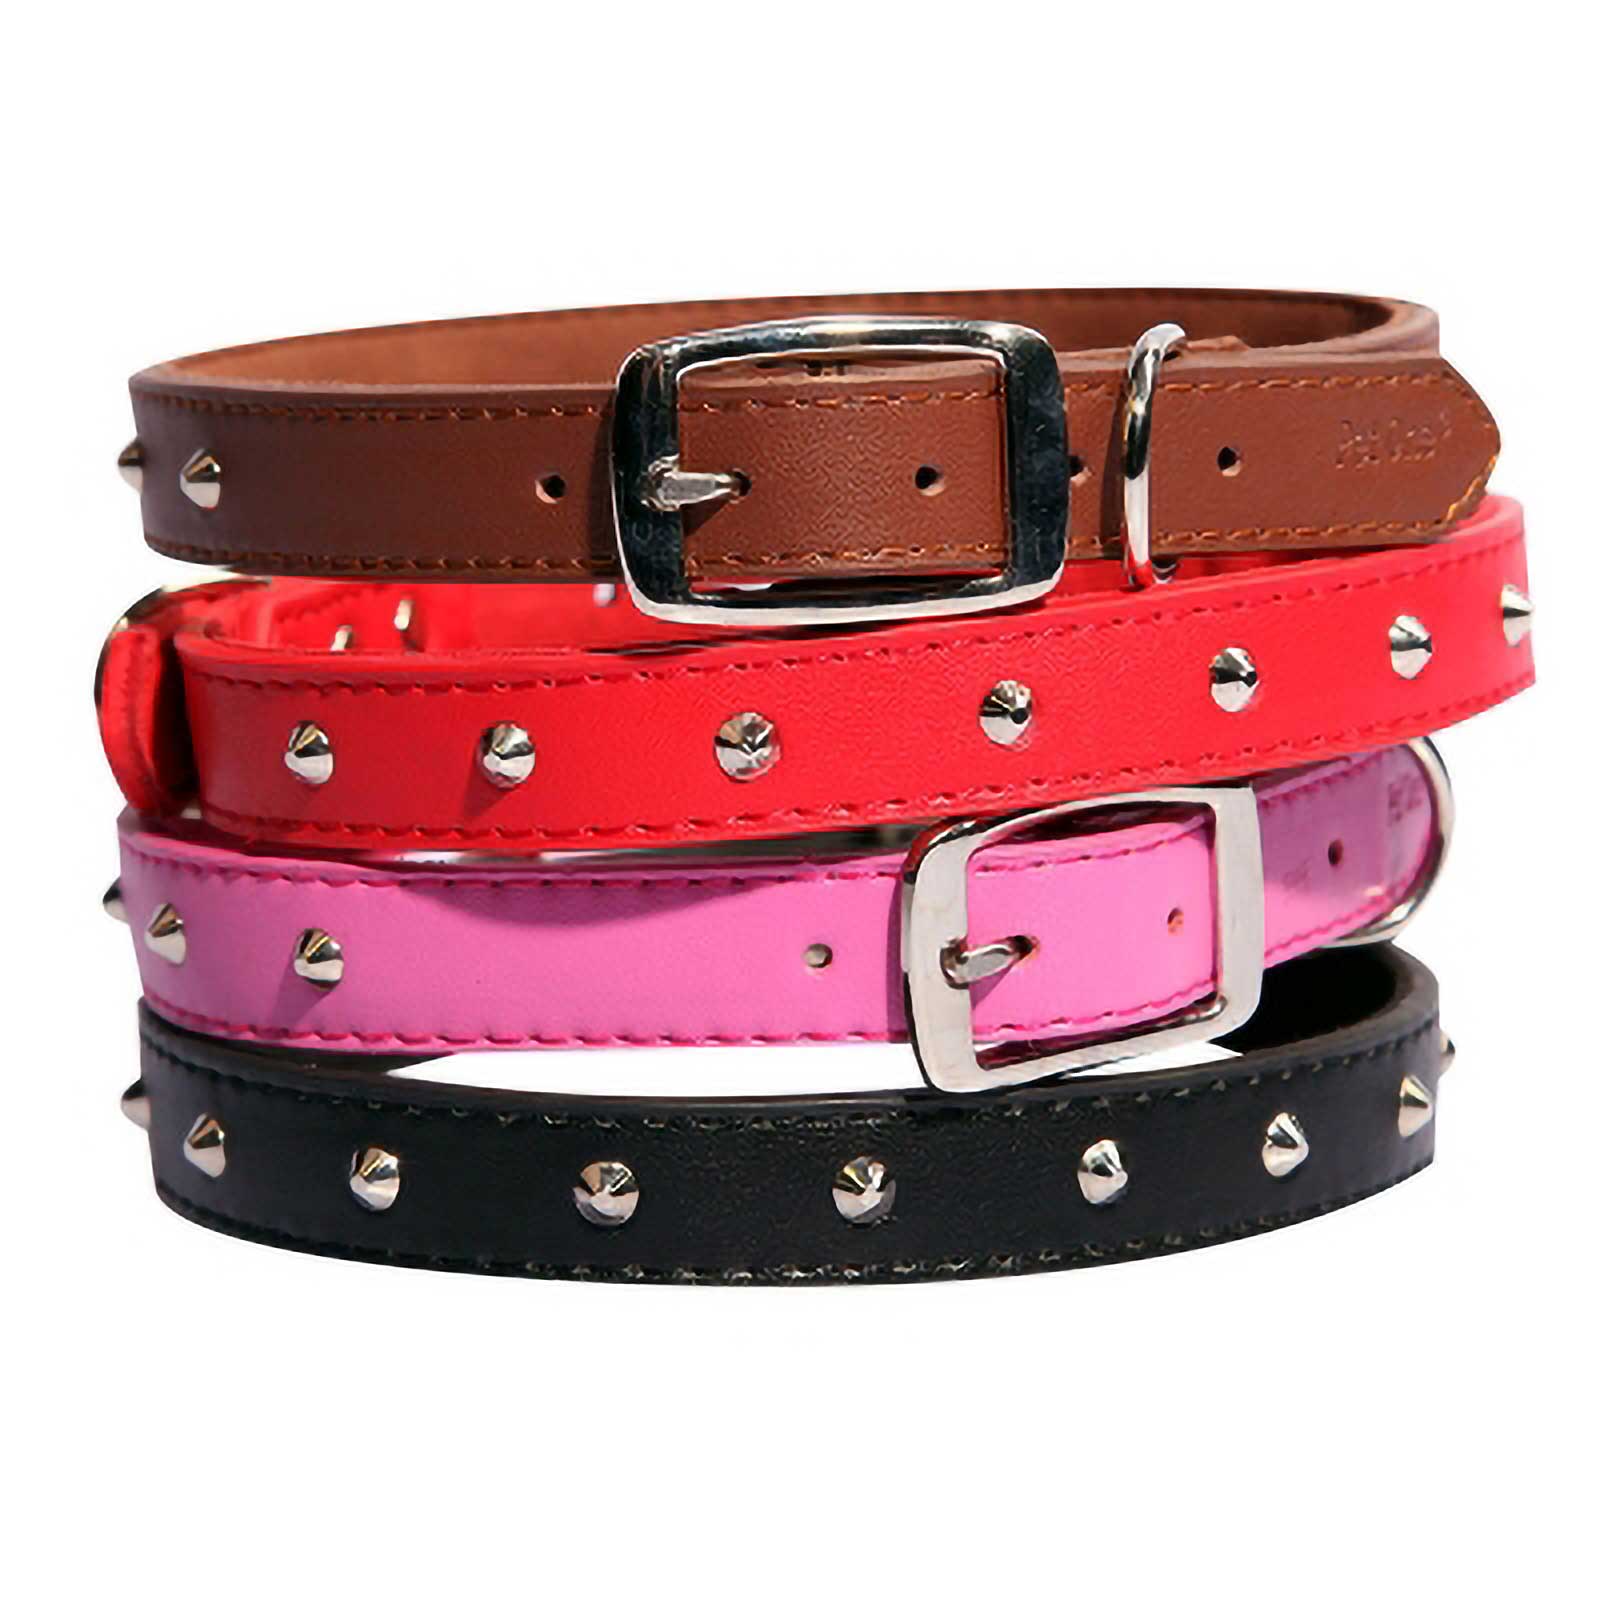 Pet One Studded Leather Dog Collar